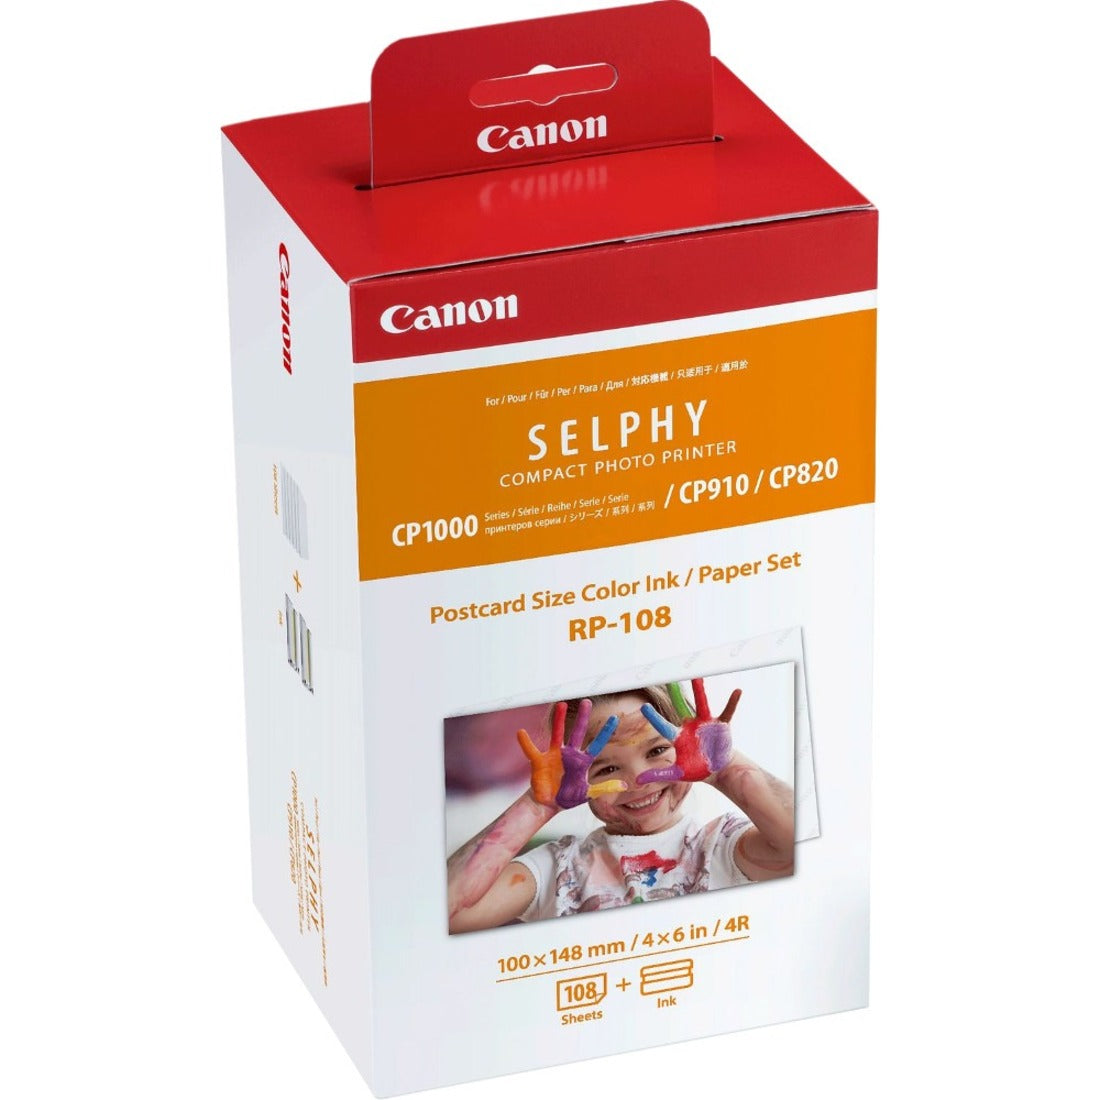 Canon RP-108 CP820/CP1000/CP910 HIGH-CAPACITY COLOR INK/PAPER (8568B001), RP-108 Ink/Paper Set Postcard Size - 108 Prints